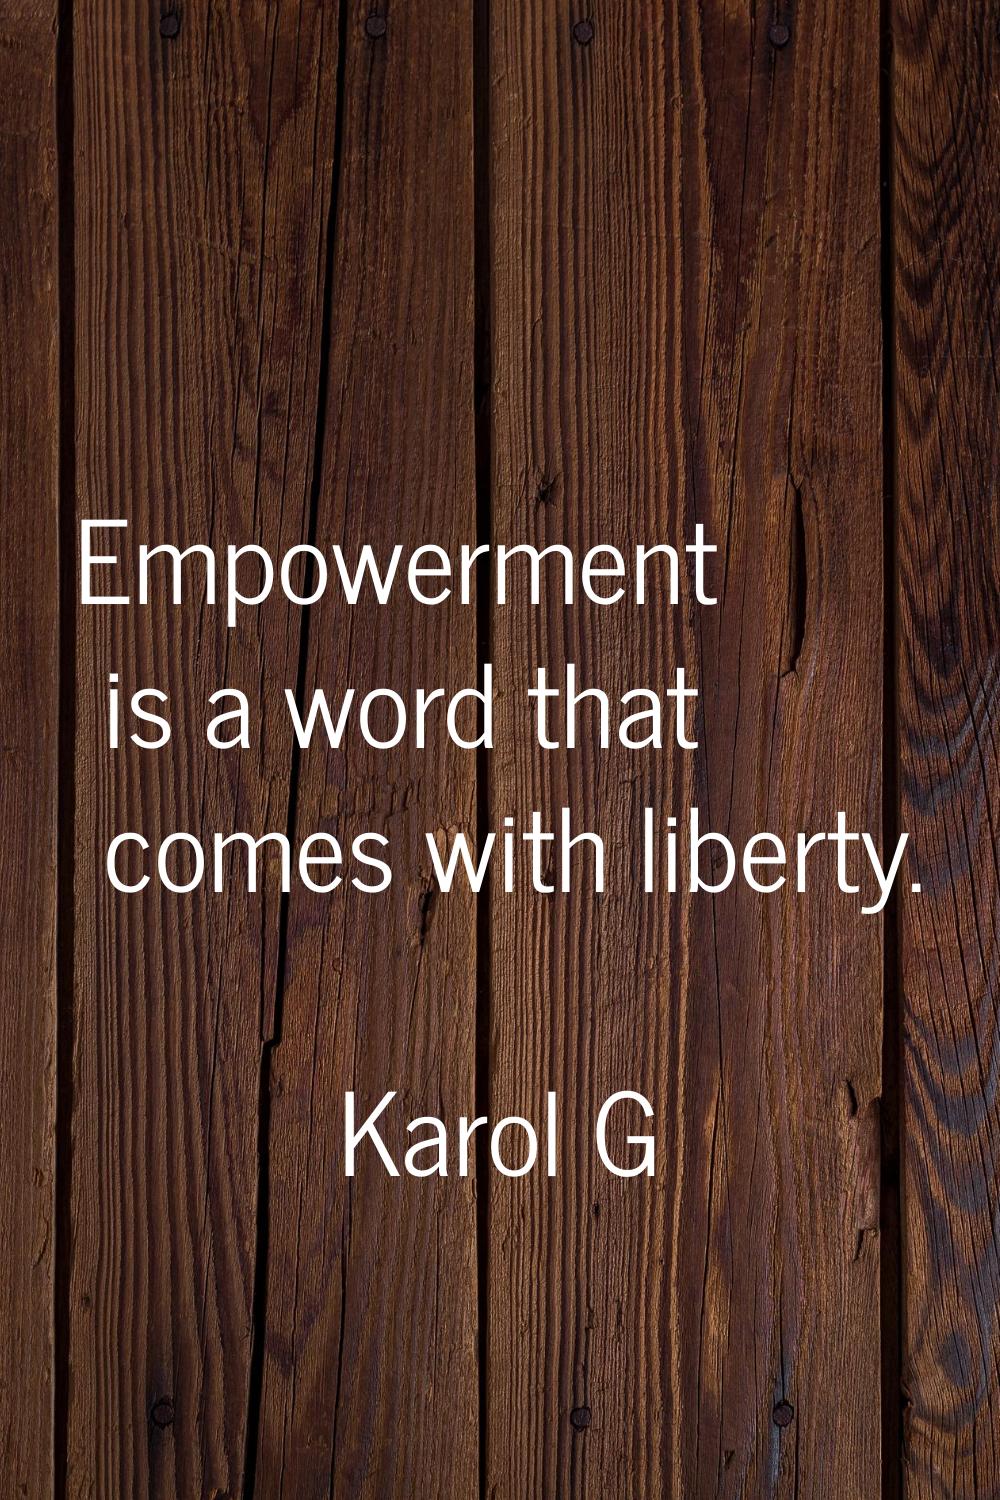 Empowerment is a word that comes with liberty.